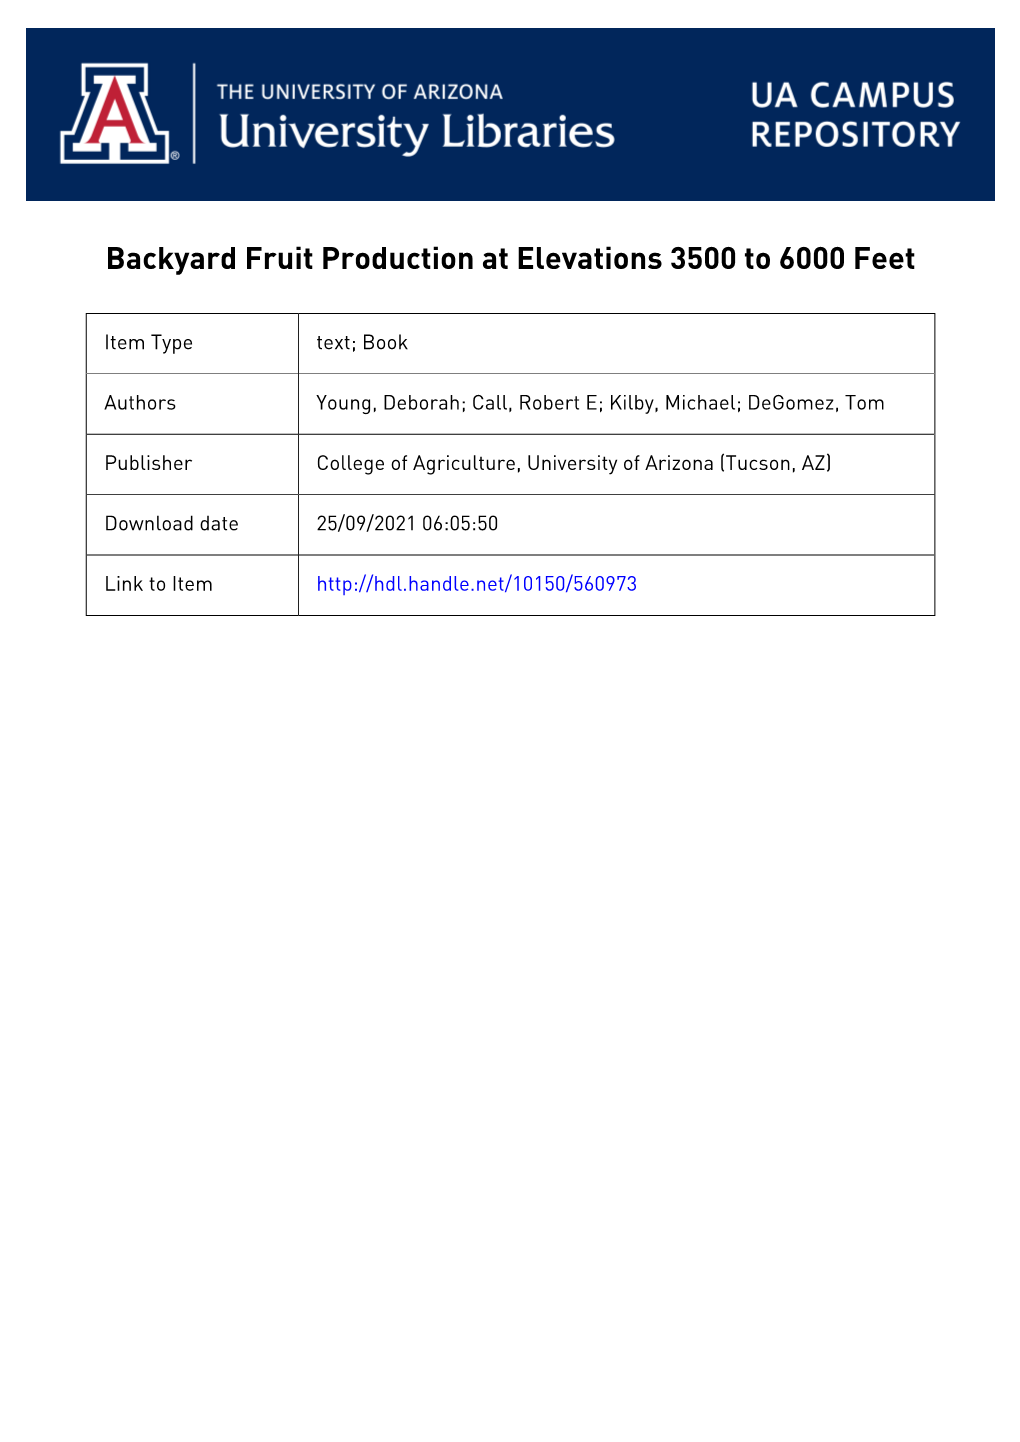 Backyard Fruit Production at Elevations 3500 to 6000 Feet